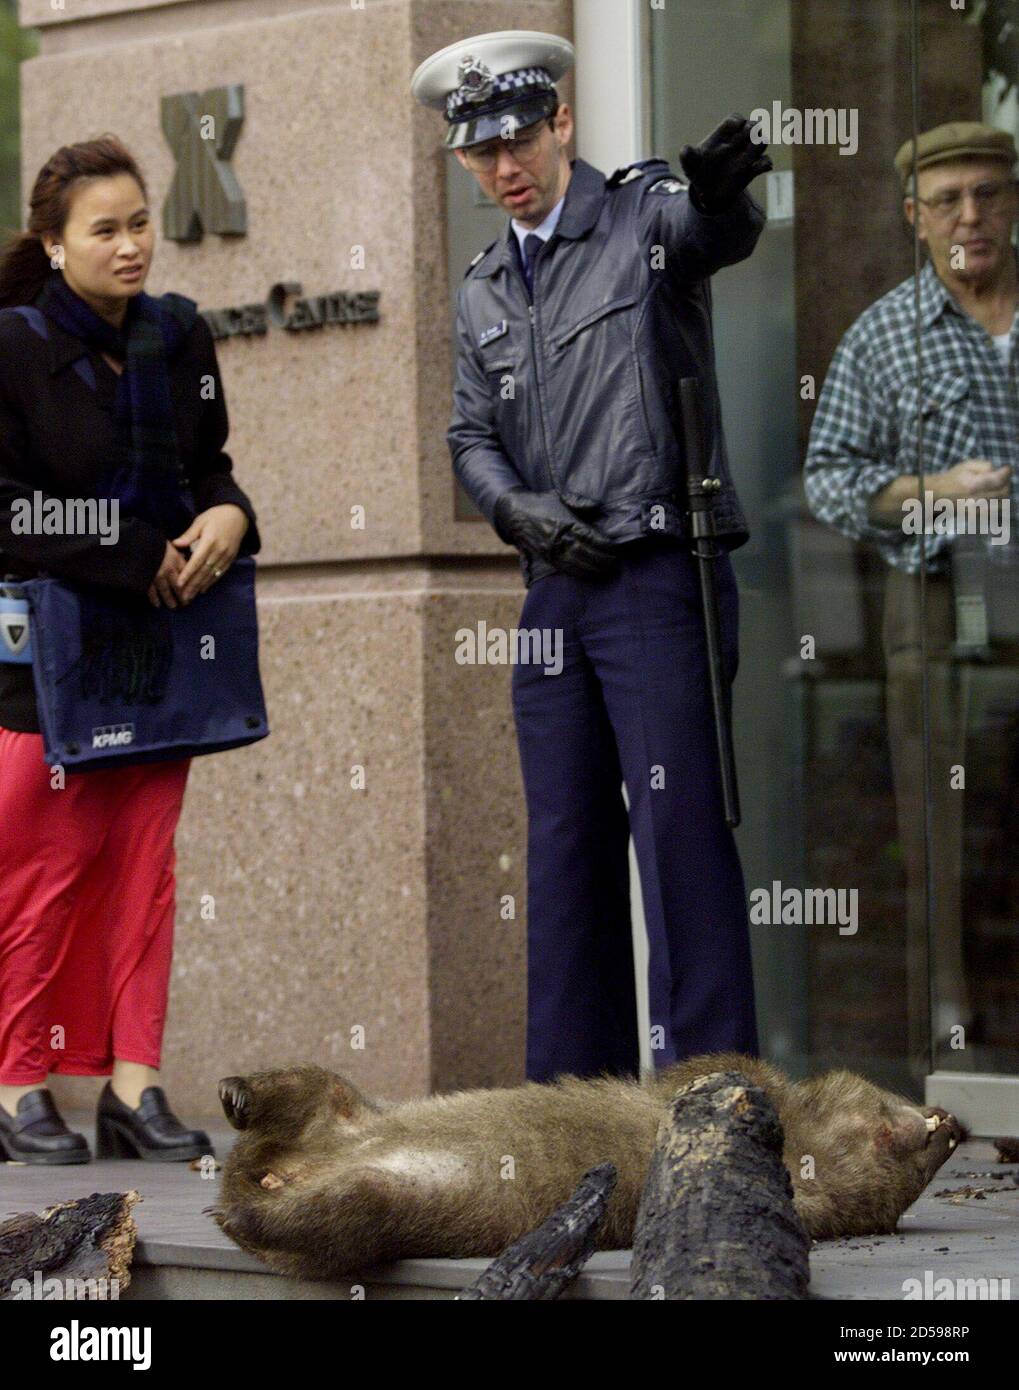 A police officer gives directions to a passerby (L) as a man (R) looks out from inside the Stock Exchange Center in Melbourne June 18. At the feet of the constable lies the carcass of a wombat, a victim of roadkill and burnt logs dumped outside the financial centre by activists protesting against woodchipping and pegging their demonstartion to the G8 Summit by world leaders in Cologne. The public anti-woodchipping lobby say demands for woodchips by a Japanese company is ruining forests and killing animals.  WB/JIR/WS Stock Photo